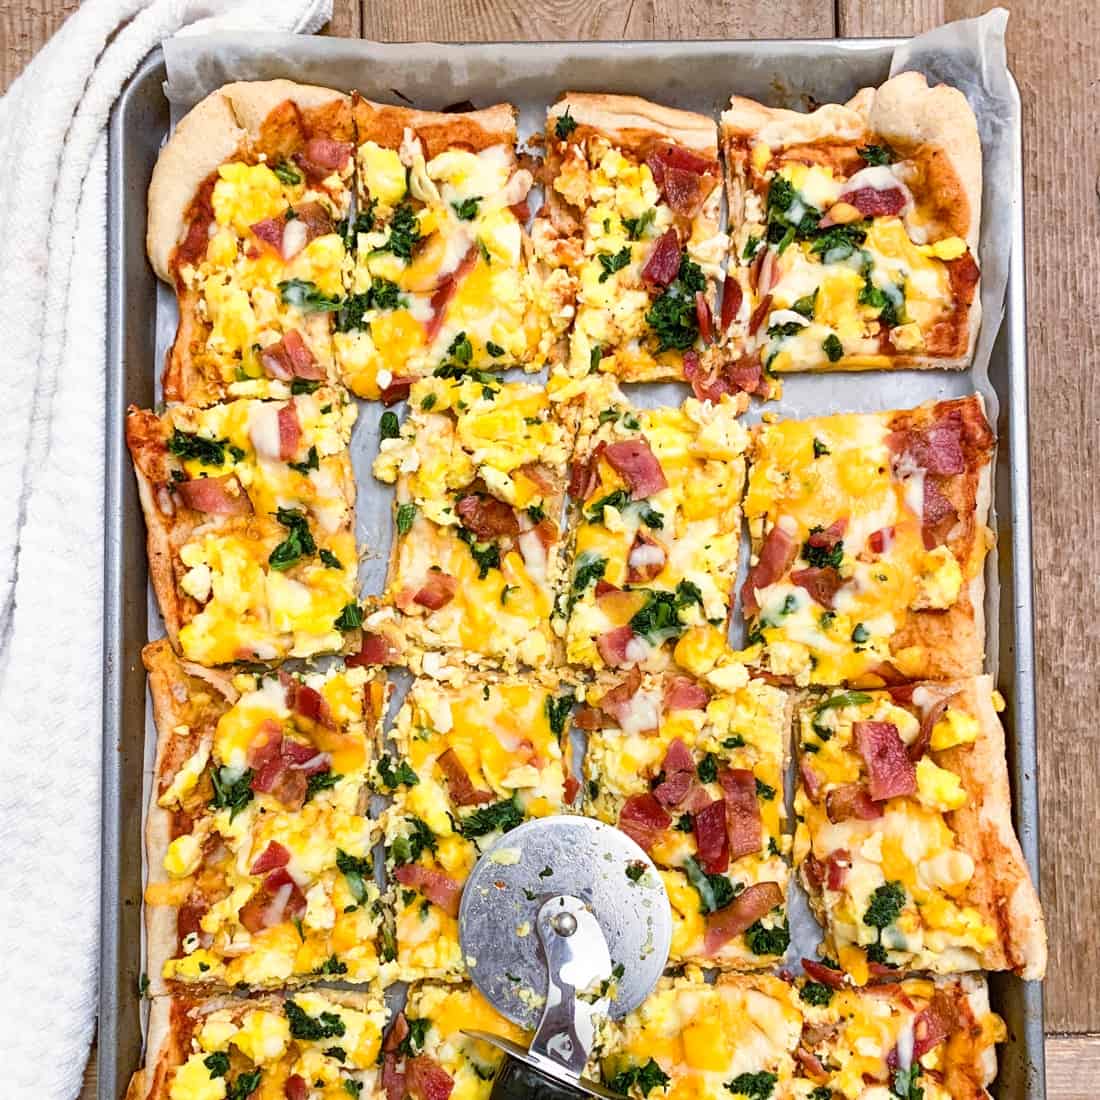 How To Make Sheet Pan Breakfast Pizza